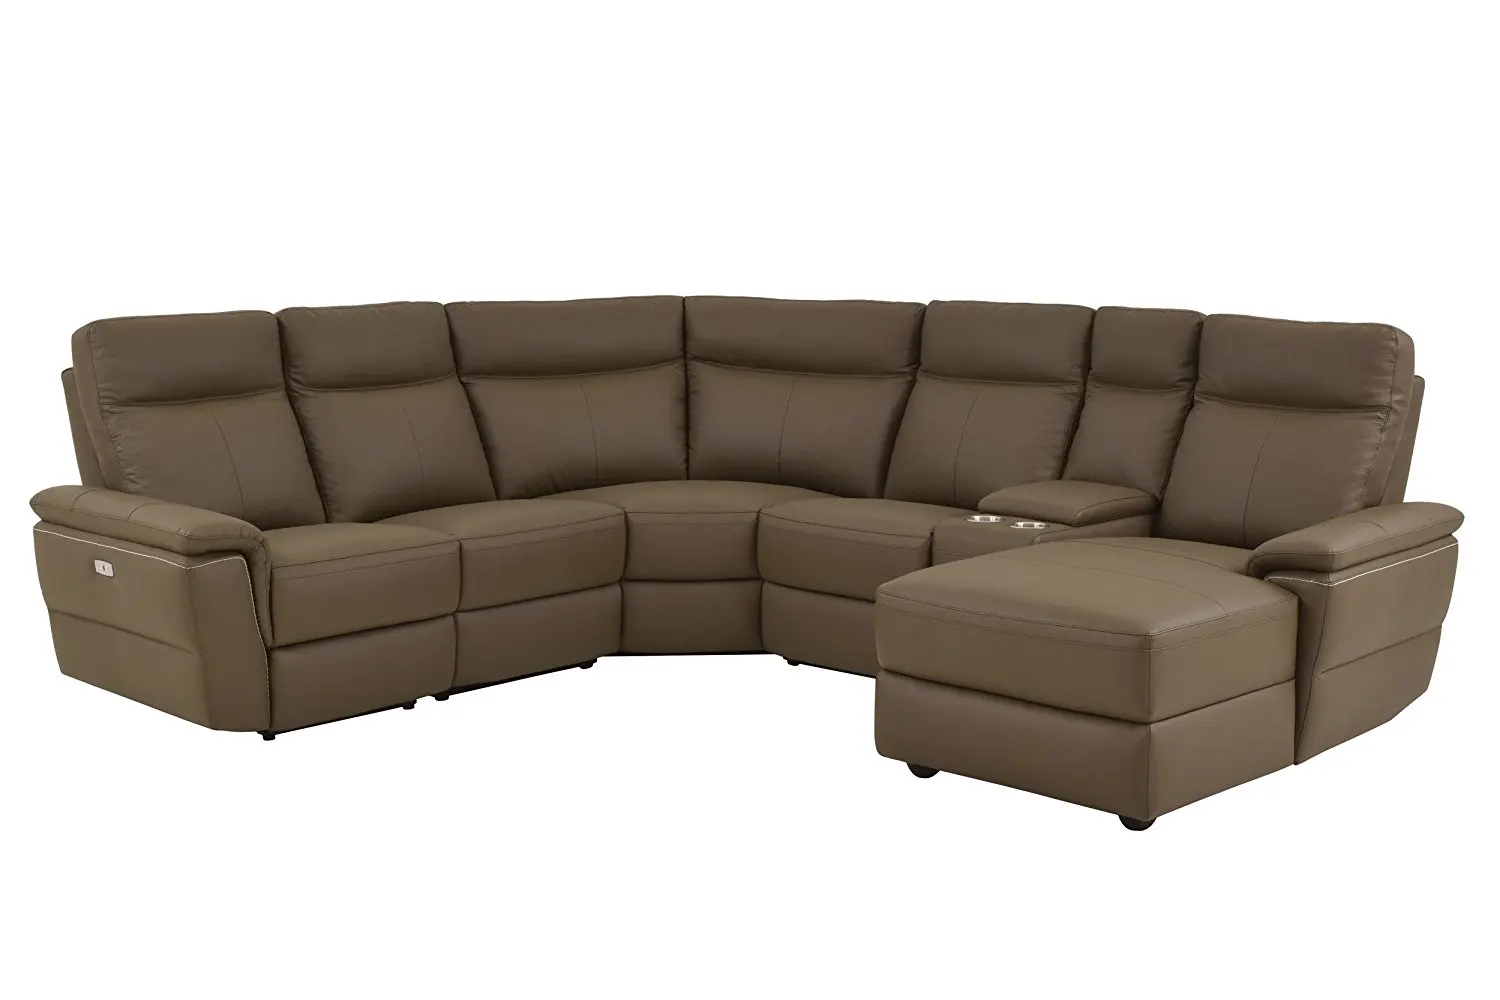 Brown and Center Cup holders Console Fabric Chenille Homelegance Shreveport 6-Piece Sectional with Three Reclining Chairs